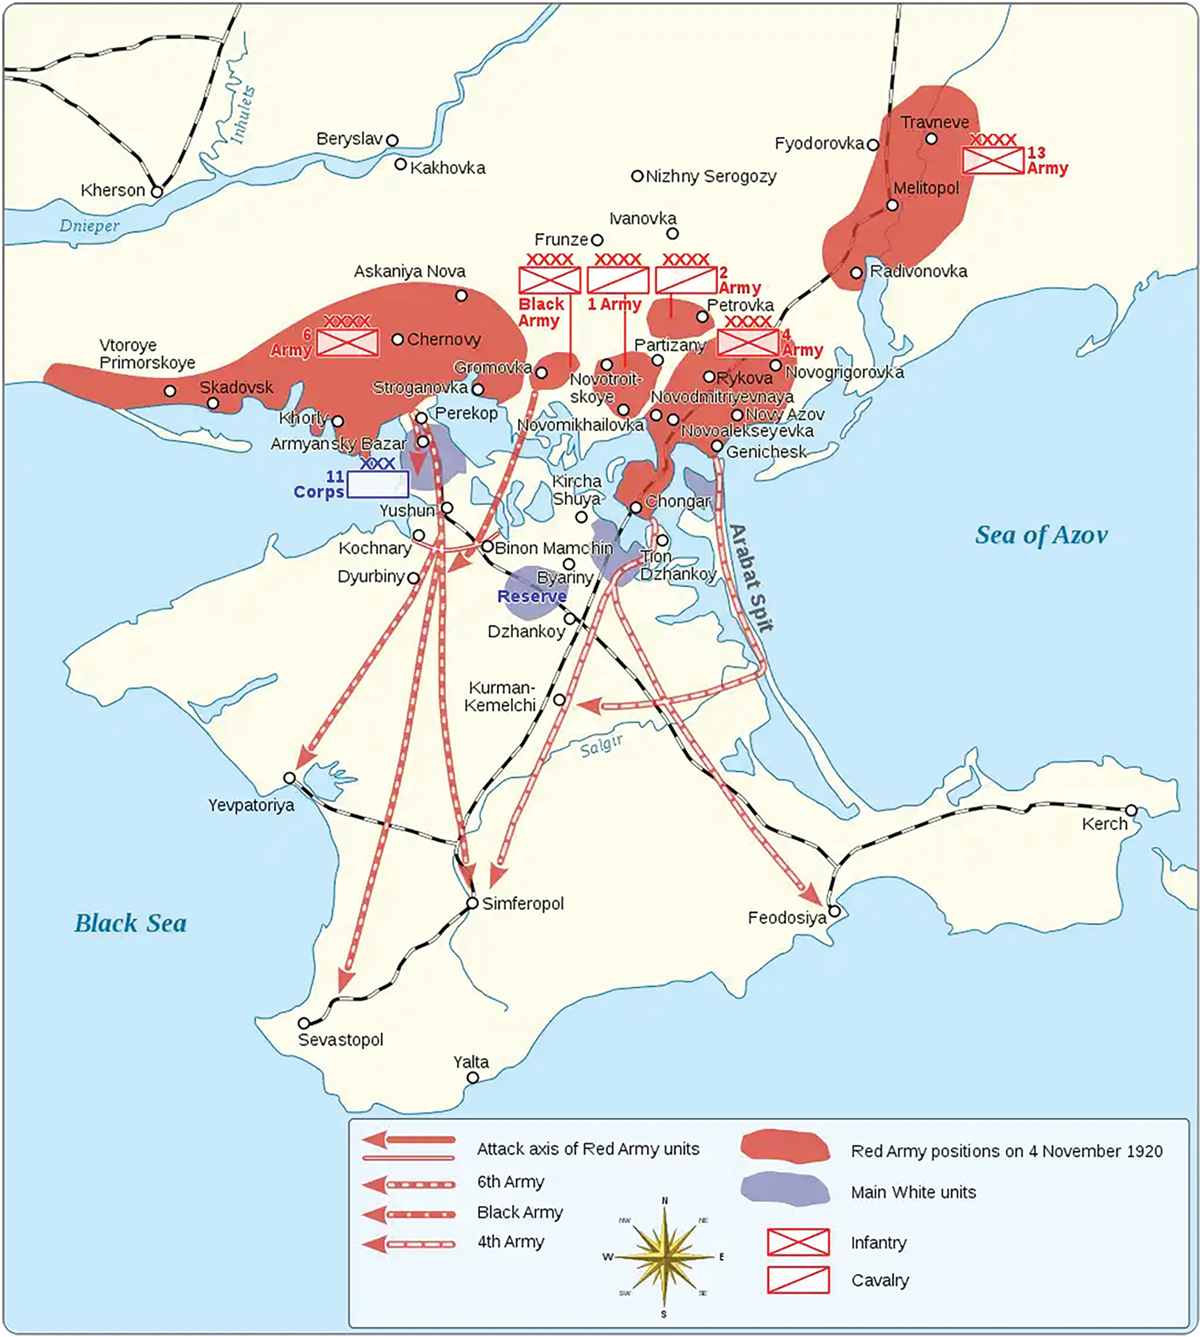 Map showing military positions and movements during a historical battle with red and blue markings for different armies, arrows indicating attack directions, and labels for geographic locations.